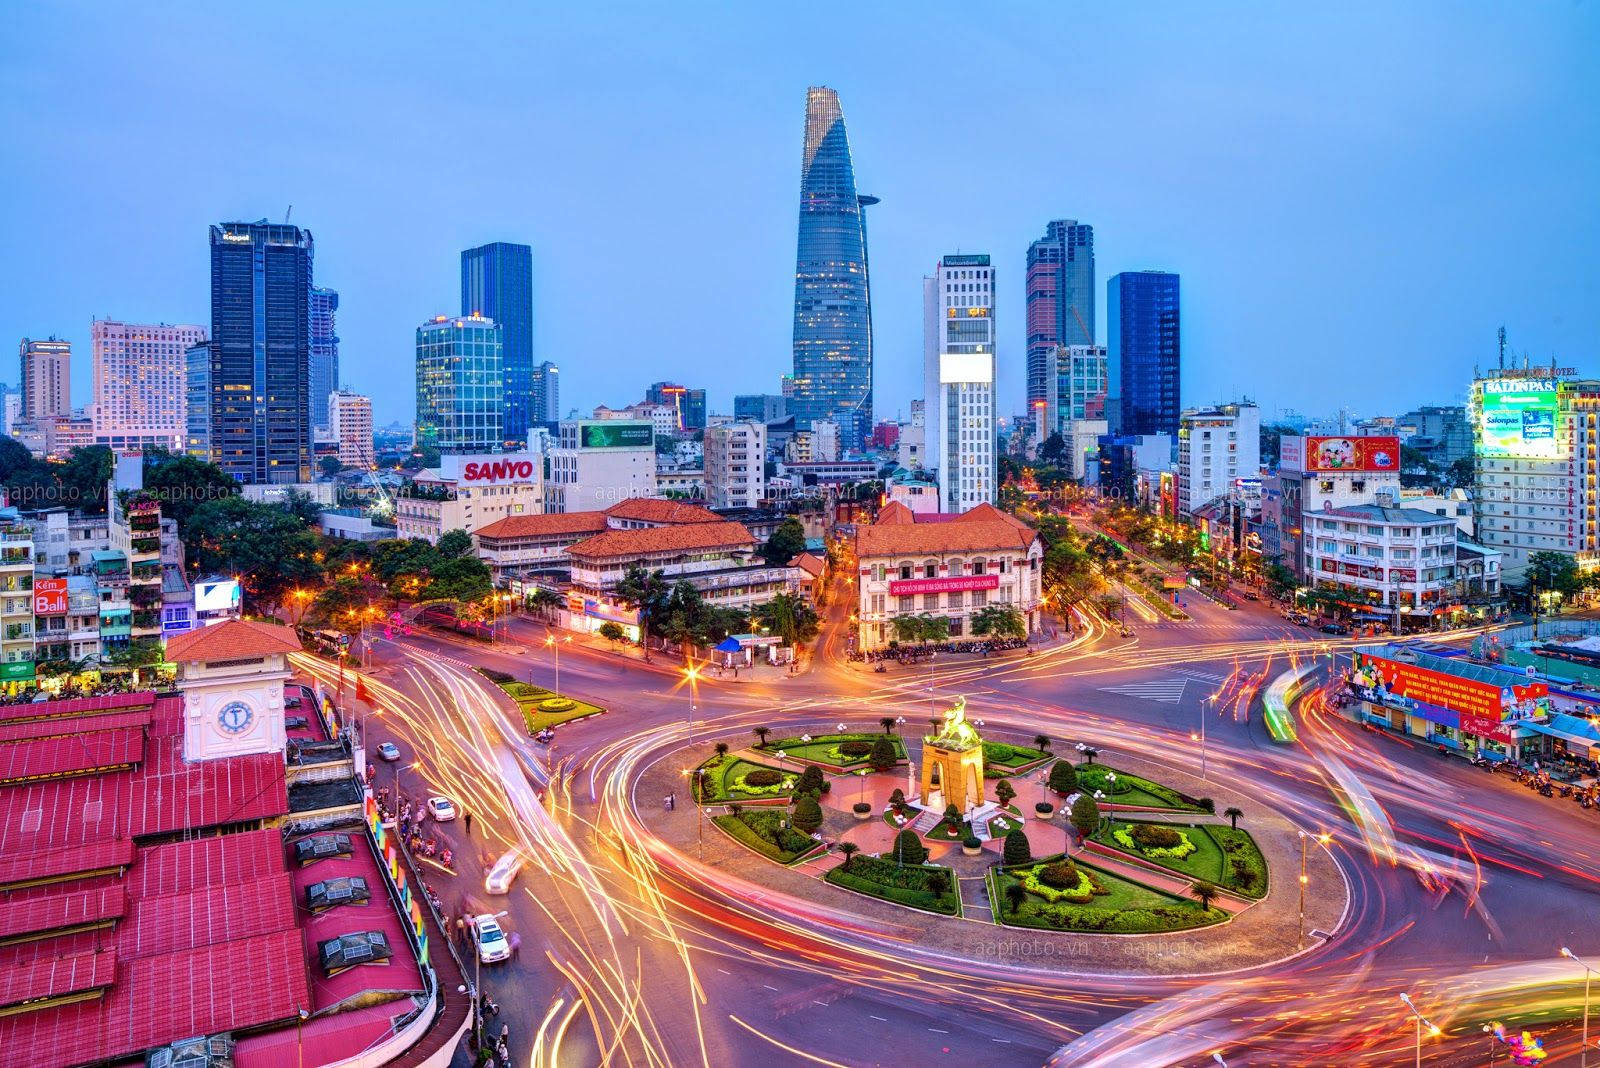 Hochi Minh City Roundabout Park In German Would Be 